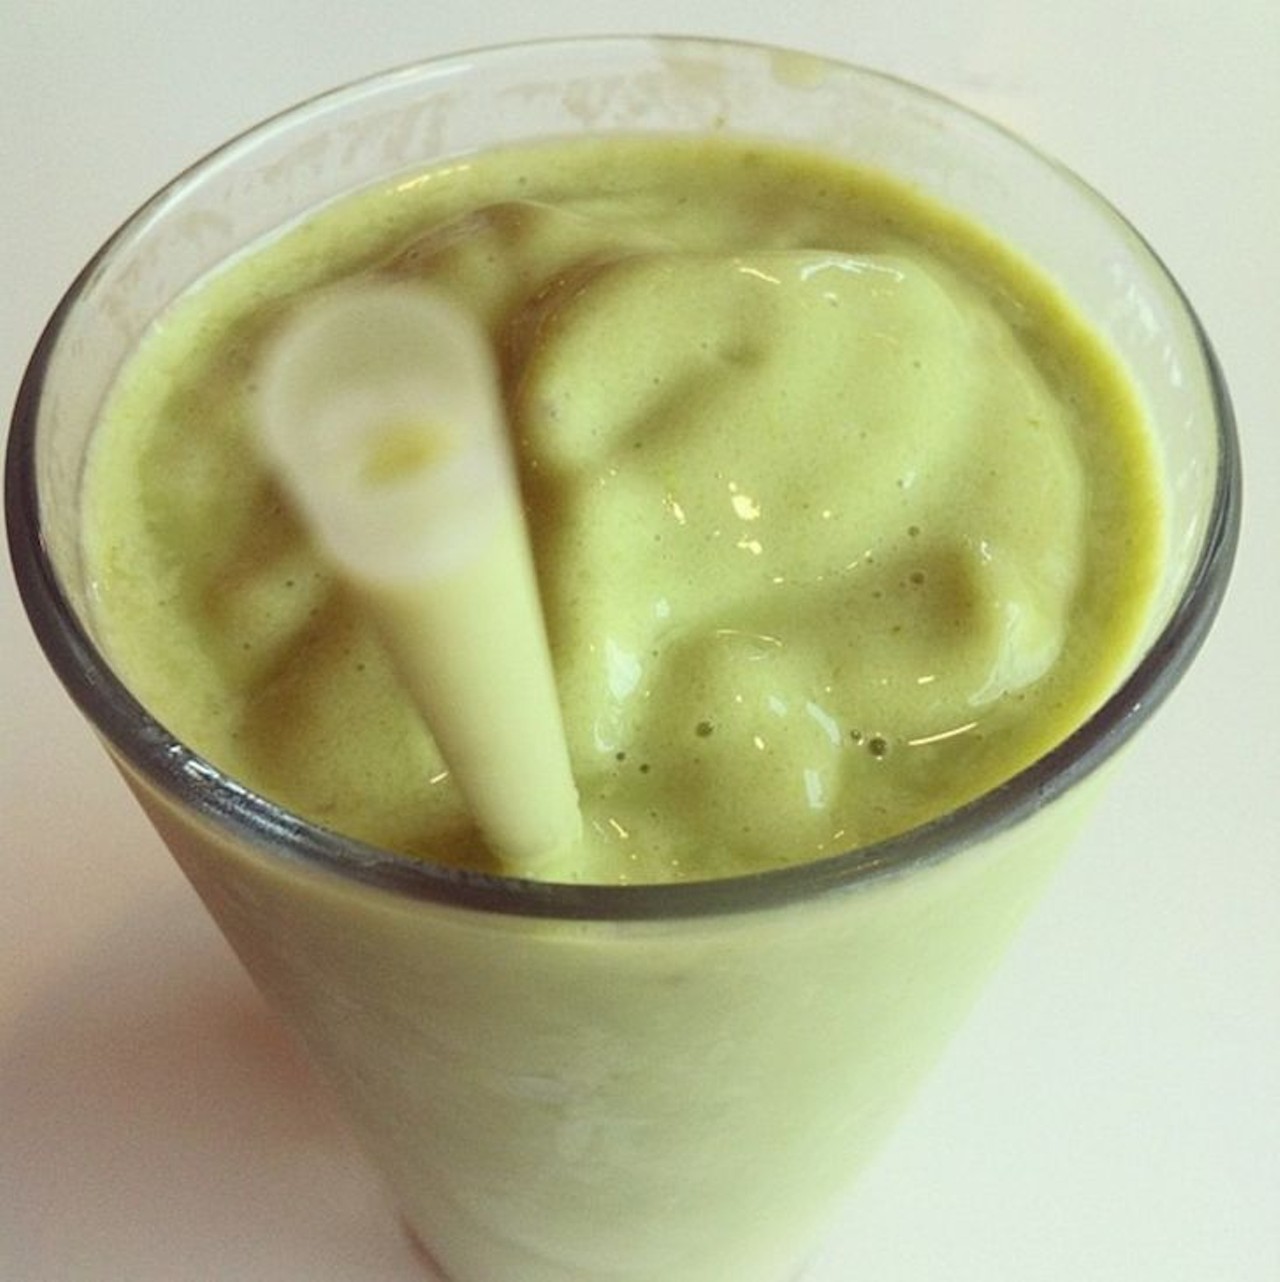 Avocado Drink at Loving Hut 
2101 E. Colonial Drive, 407-894-5673 
Don't be put off by the bare-bones name. This is a lush, creamy blend of soy milk, fresh avocado and unrefined sugar, whipped up in the Vitamix into a thirst-quenching pale-green slurp that actually tastes like avocado, not generic vanilla smoothie. - JBY
Photo via sommantics/Instagram